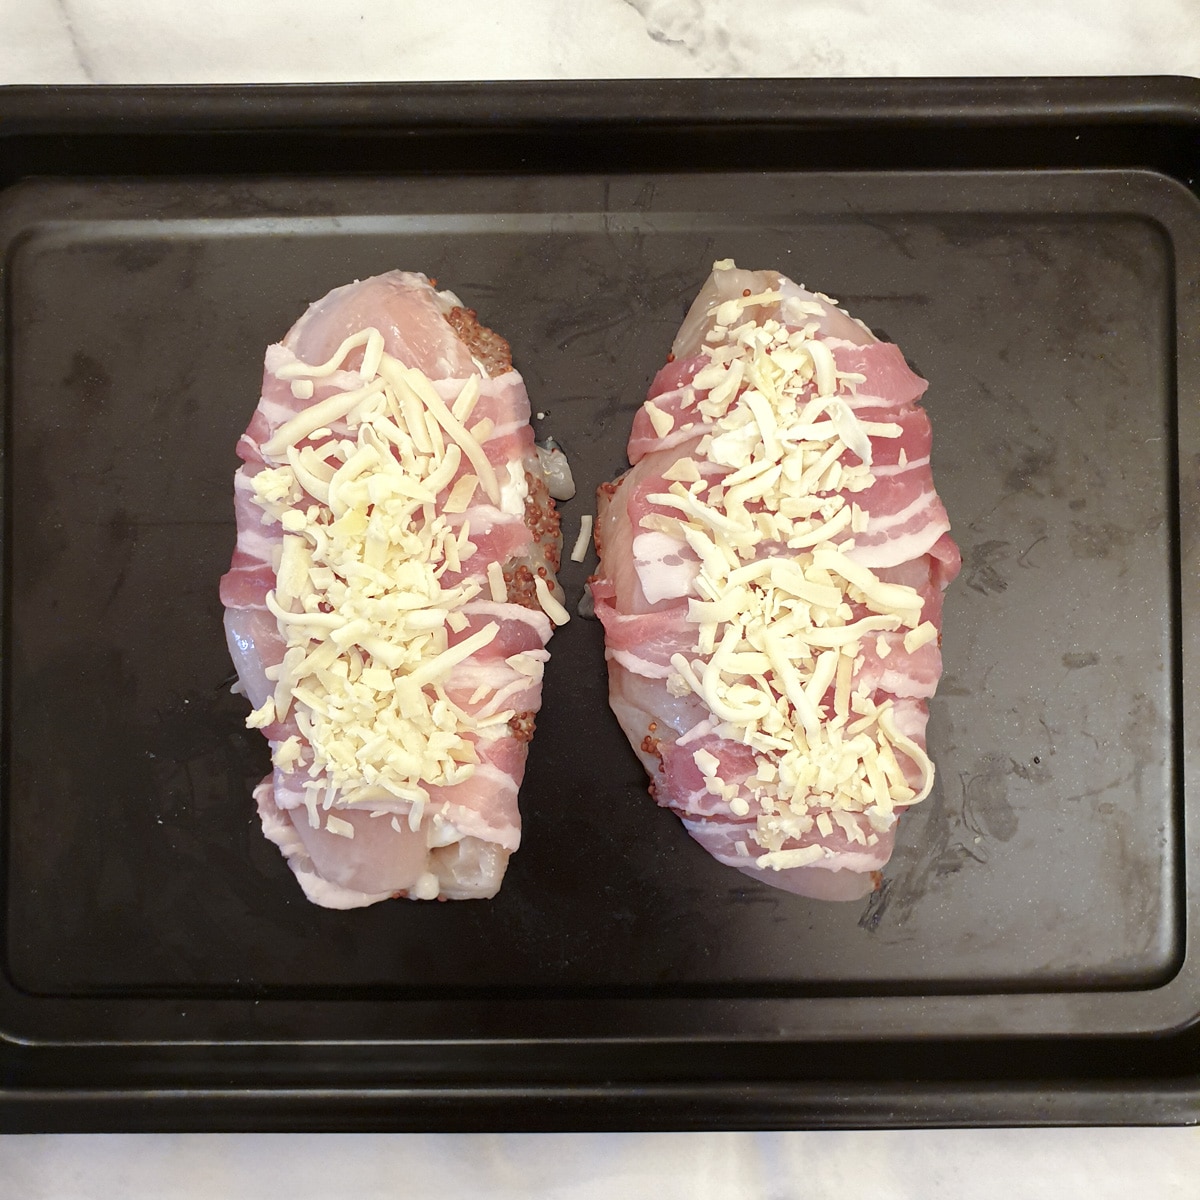 Two bacon wrapped chicken breasts sprinkled with grated cheese on a baking tray.